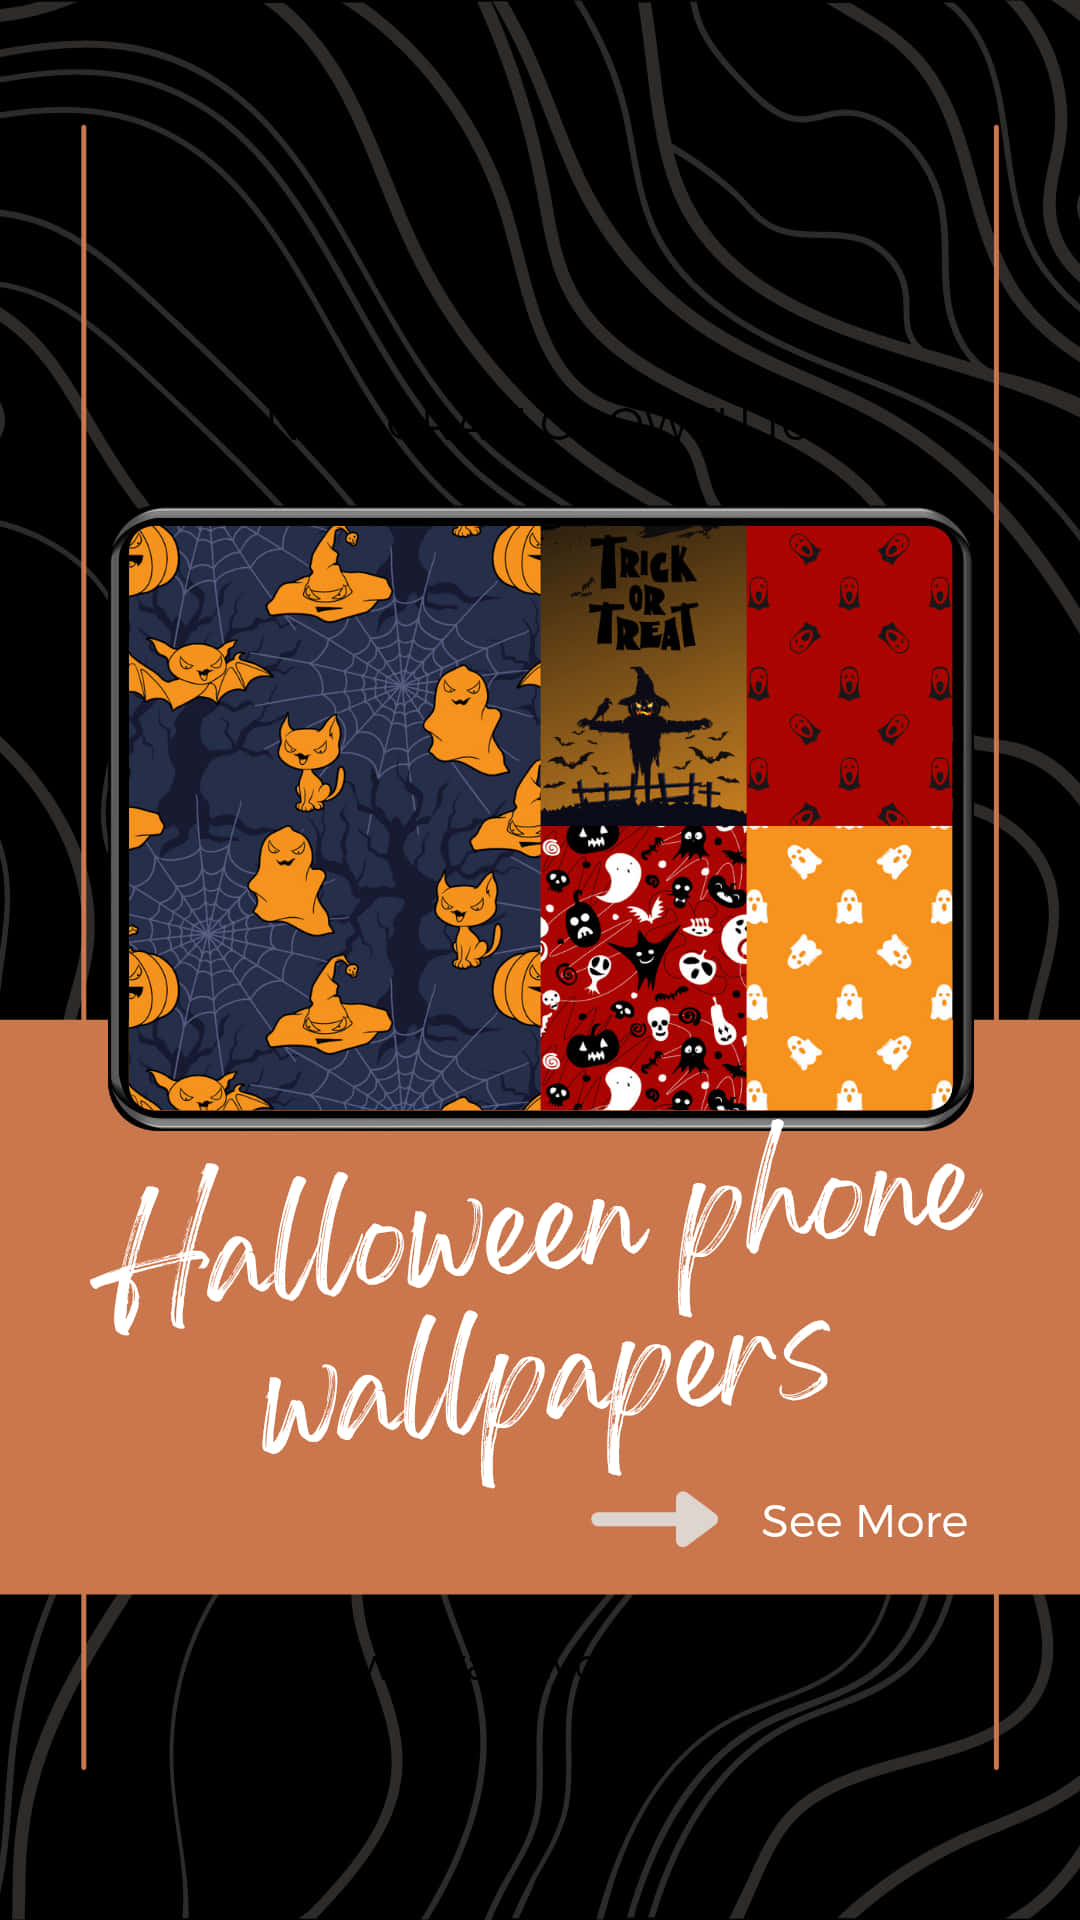 Get Into The Spirit Of The Season With This Girly And Charismatic Halloween Look. Wallpaper